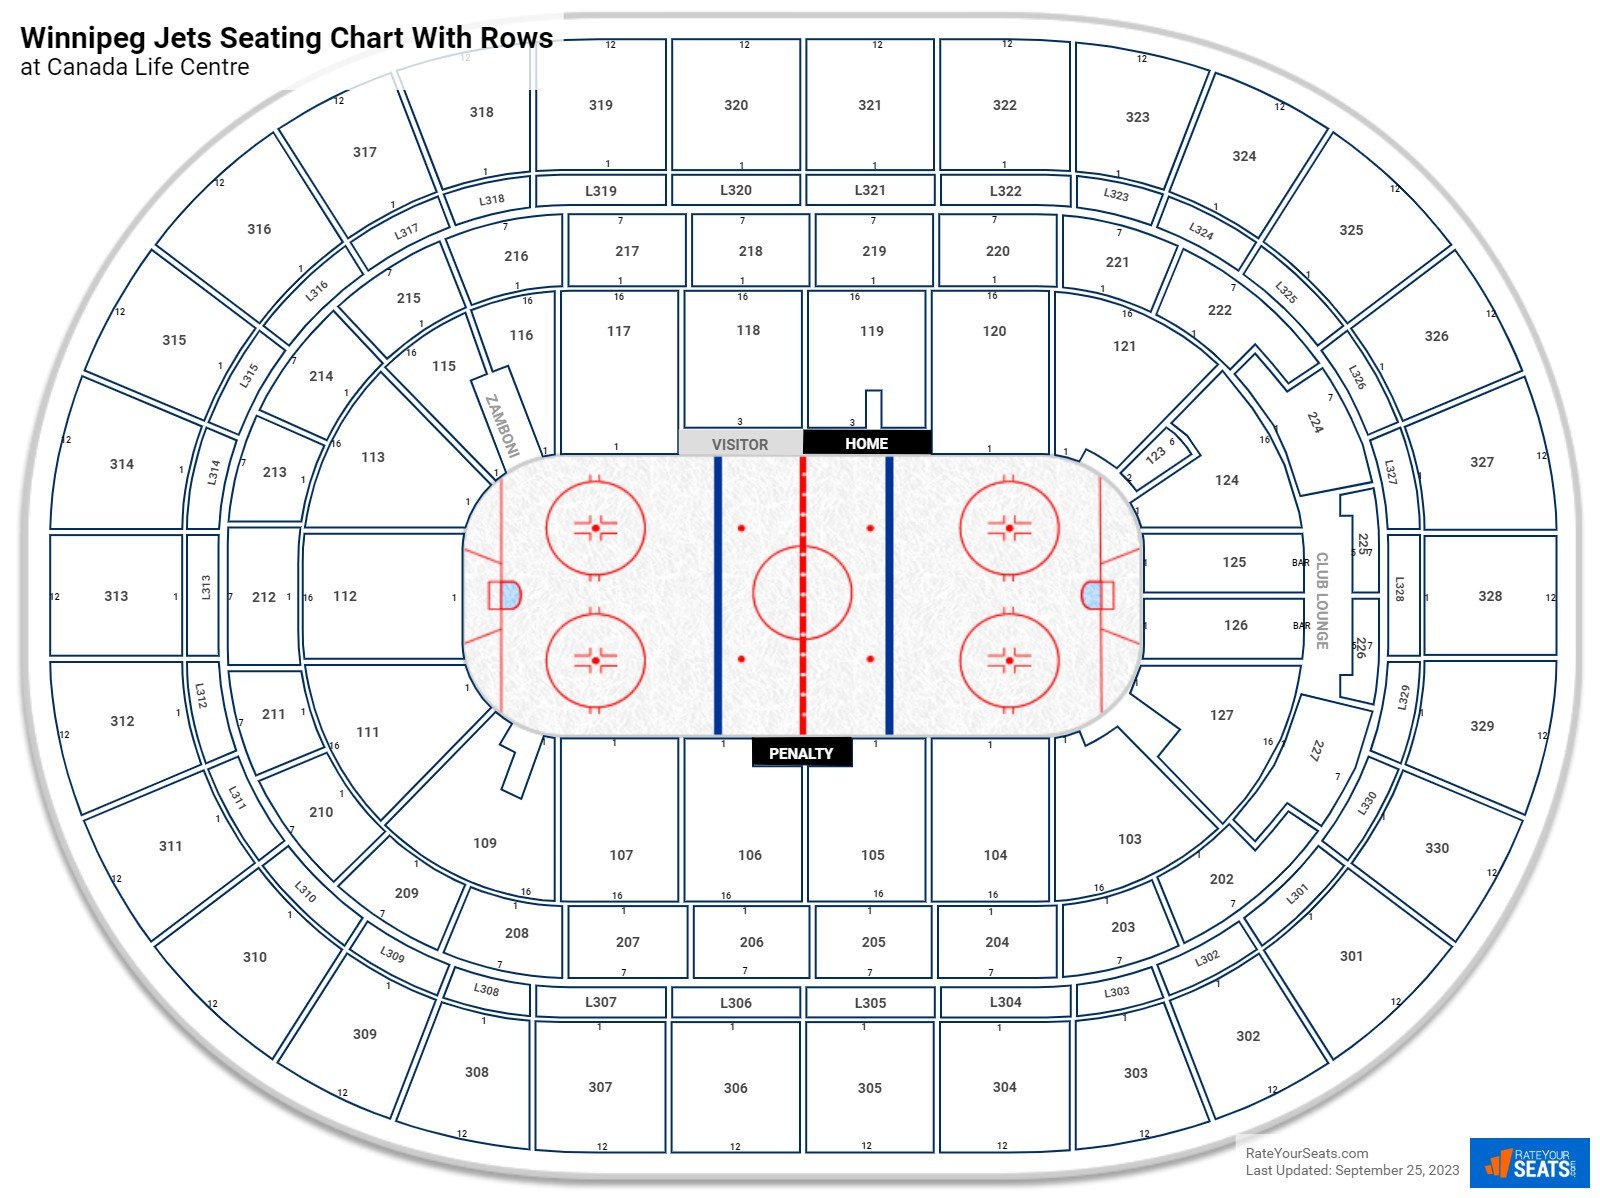 Canada Life Centre seating chart with row numbers